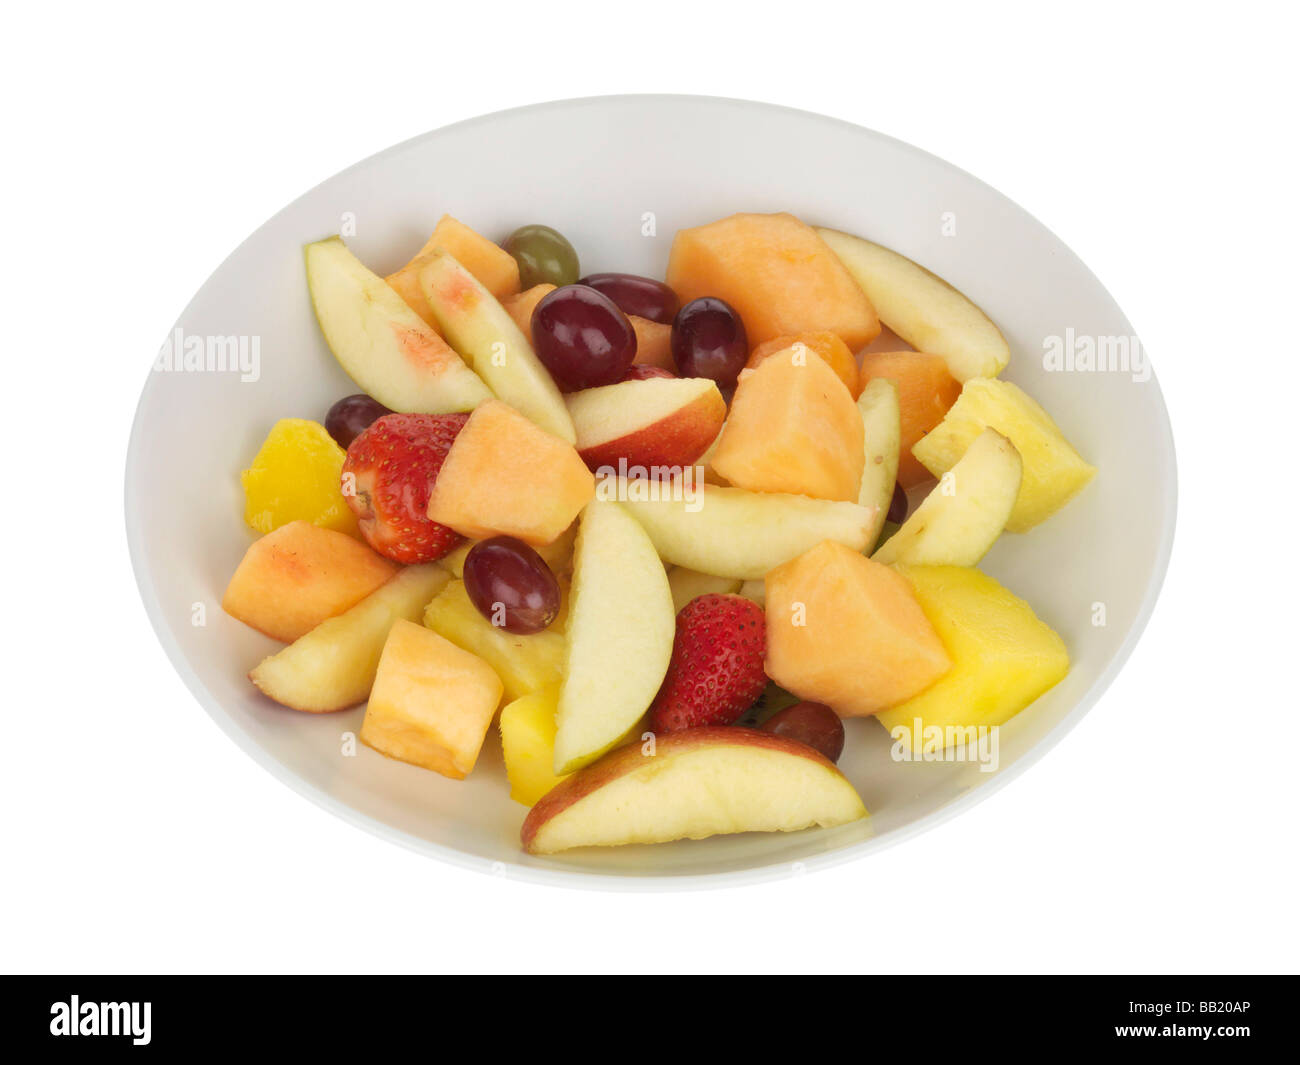 Fresh Healthy Bowl Of Organic Fruit Salad Isolated Against A White Background With No People And A Clipping Path Stock Photo